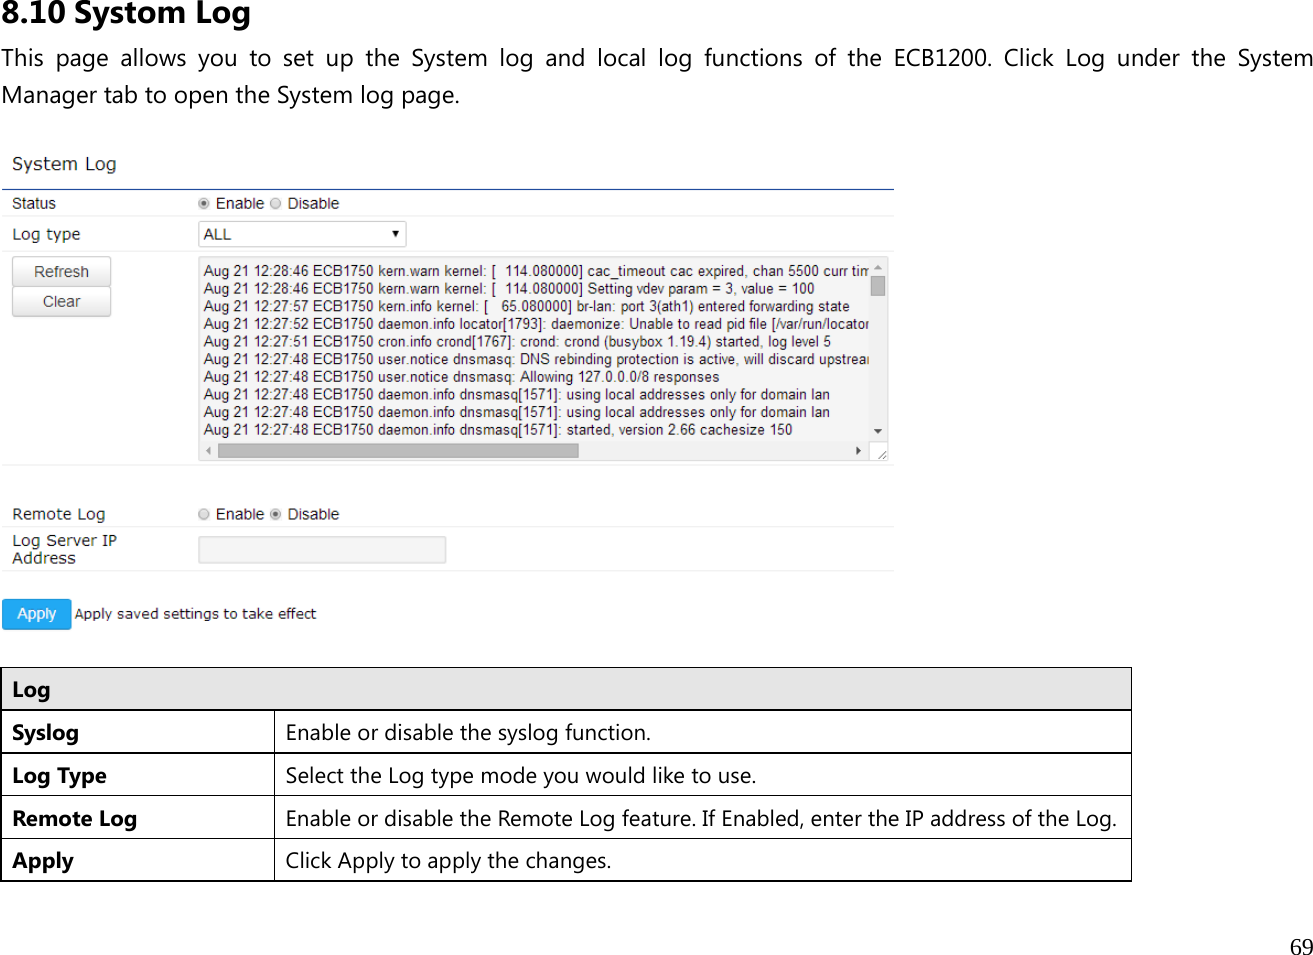  69  8.10 Systom Log This page allows you to set up the System log and local log functions of the ECB1200. Click Log under the System Manager tab to open the System log page.    Log Syslog  Enable or disable the syslog function.Log Type  Select the Log type mode you would like to use. Remote Log   Enable or disable the Remote Log feature. If Enabled, enter the IP address of the Log.Apply Click Apply to apply the changes. 